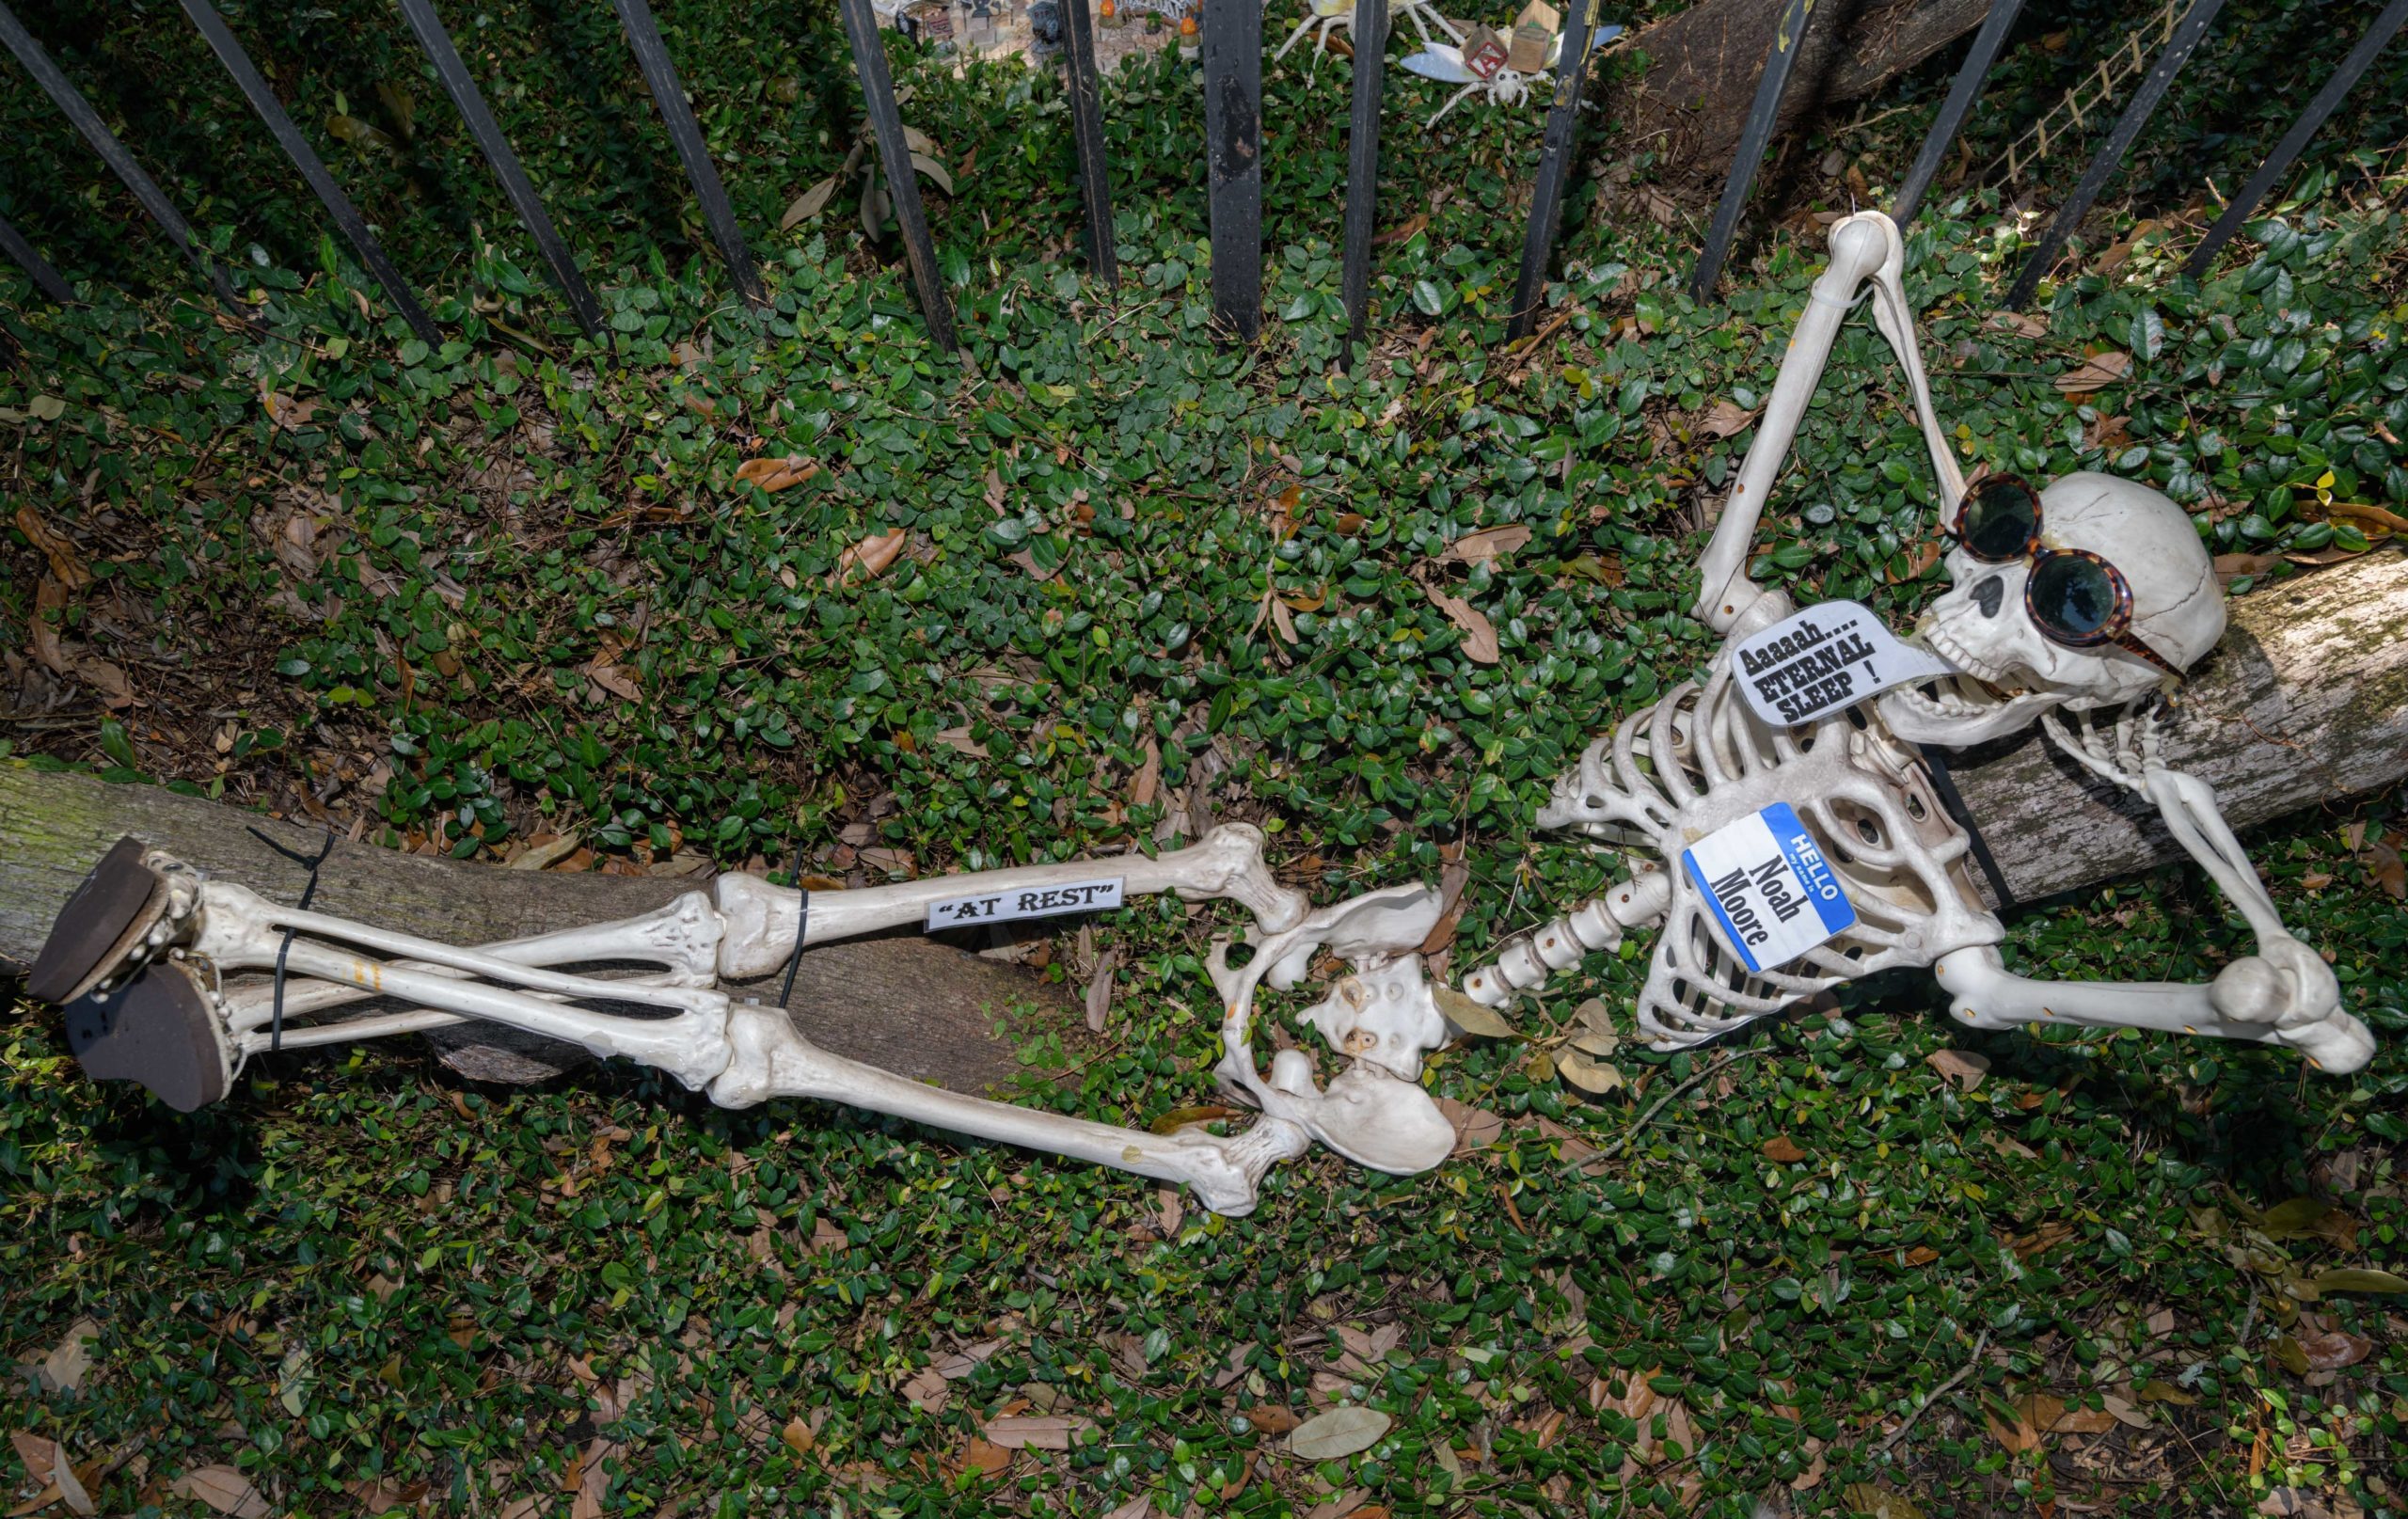 Louellen Berger sets up her annual parody skeleton garden on St. Charles Ave. and State Street in New Orleans on Monday September 30 and Tuesday October 1, 2019 with the help of Manuel Chacon. The pun-dead skeletons rib national and local celebrities and pop culture in an effort to tickle the funny bone. Berger hopes to have Dem Bones completed for viewing by later in the week and they will be on view through Halloween. She tends to keep the more colorful skeletons in the shade so they don’t fade in the sun. Once a few years back, Hurricane Nate was initially forecast to come through the area and she was on the fence on whether or not to take the display down for the storm. A family member suggested it won’t be good for recovery efforts after a storm for a random skull to be found in somewhere else in the city, so she took them down. Fortunately, the storm passed without incident. She says her grandchildren help come up with some ideas and the puns and funny sayings help the younger children learn language and idioms. Photo by Matthew Hinton